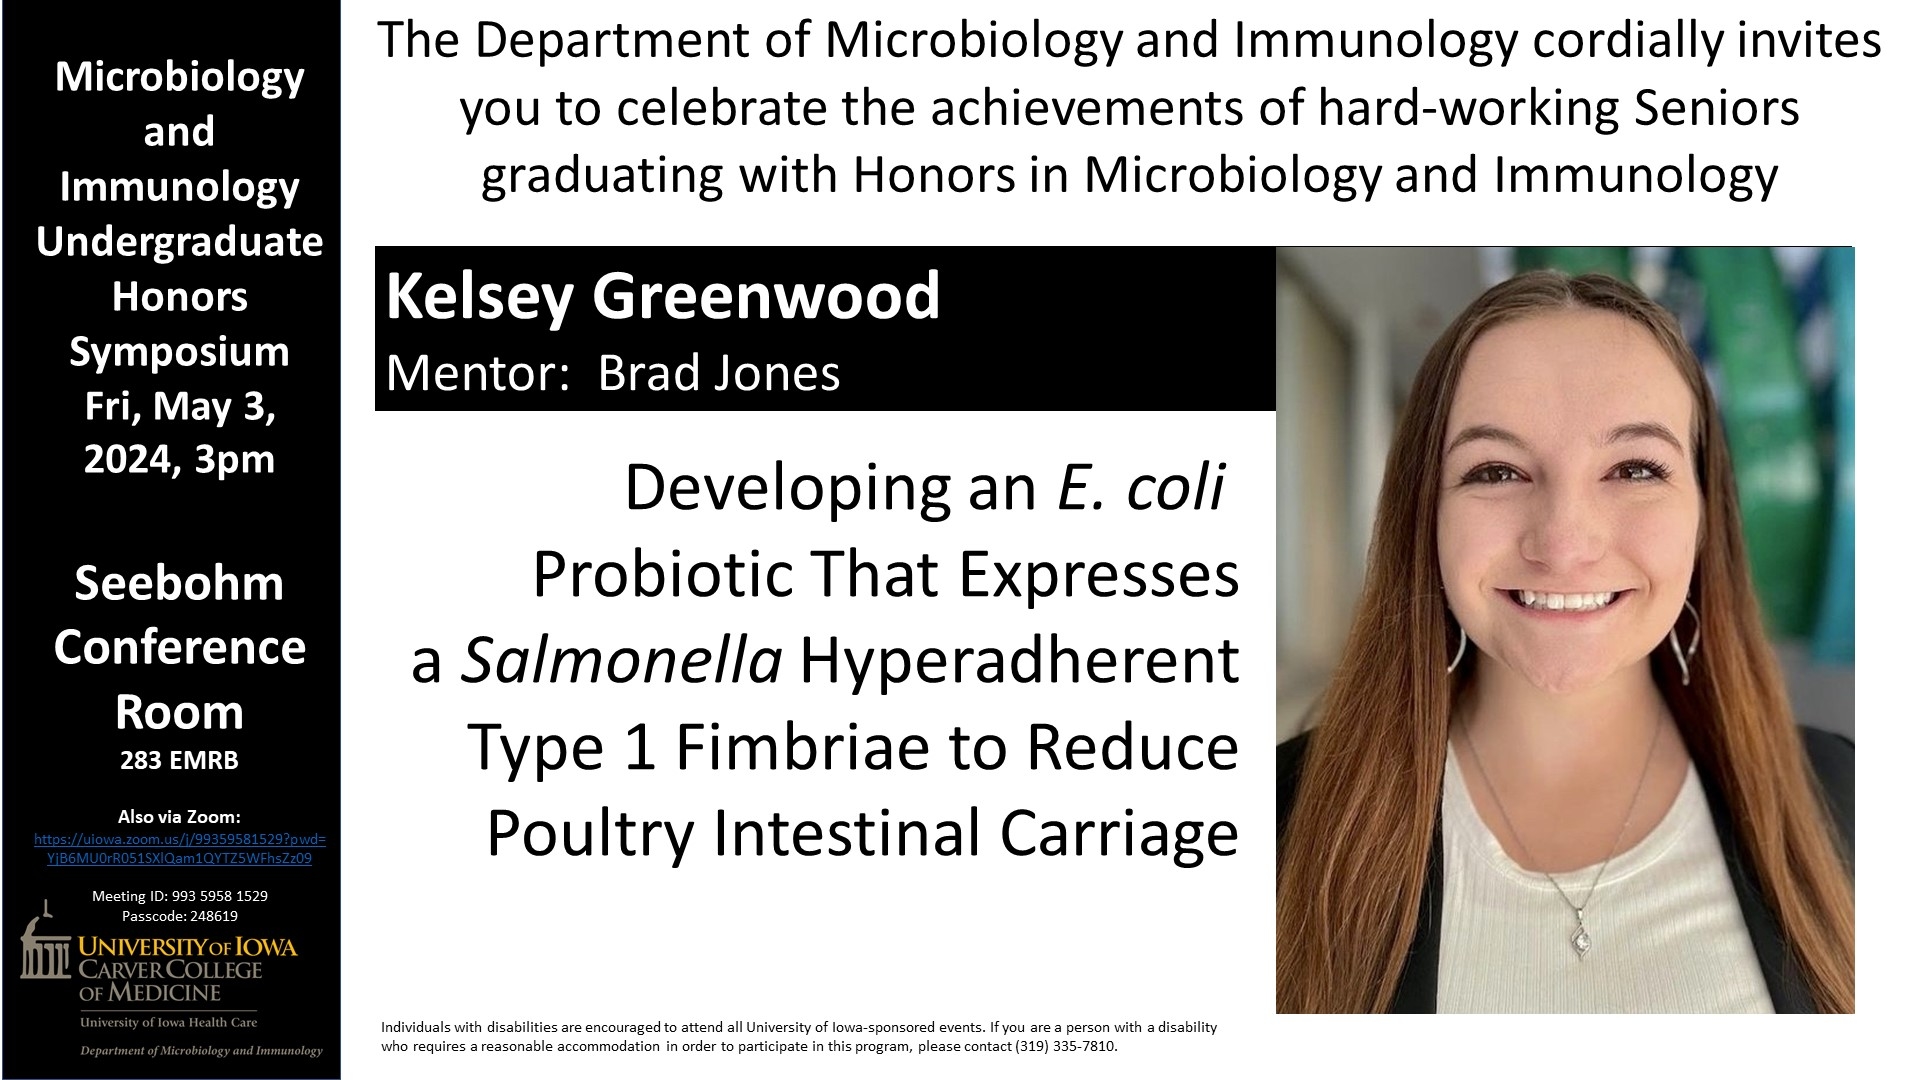 Honors in UG Microbiology Event May 3rd- Kelsey Greenwood Image